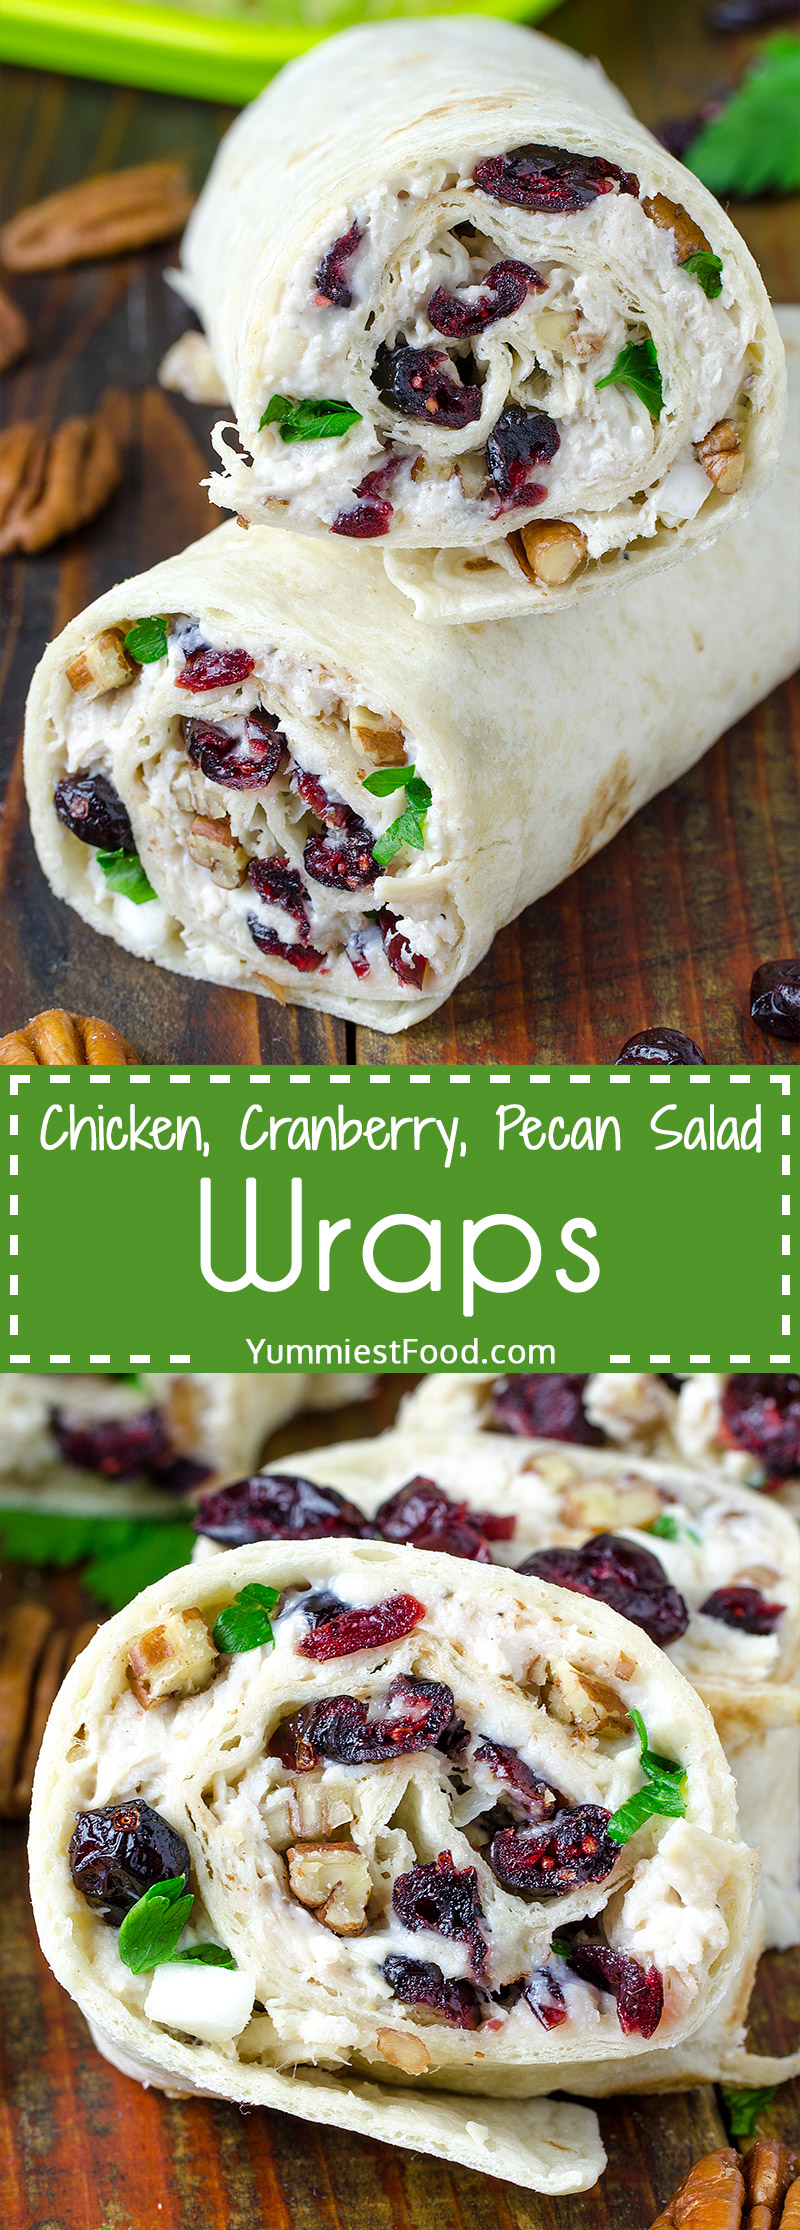 Chicken, Cranberry, Pecan Salad Wraps - a super lunch or wonderful addition. This salad is perfect for any occasion and very easy to make.